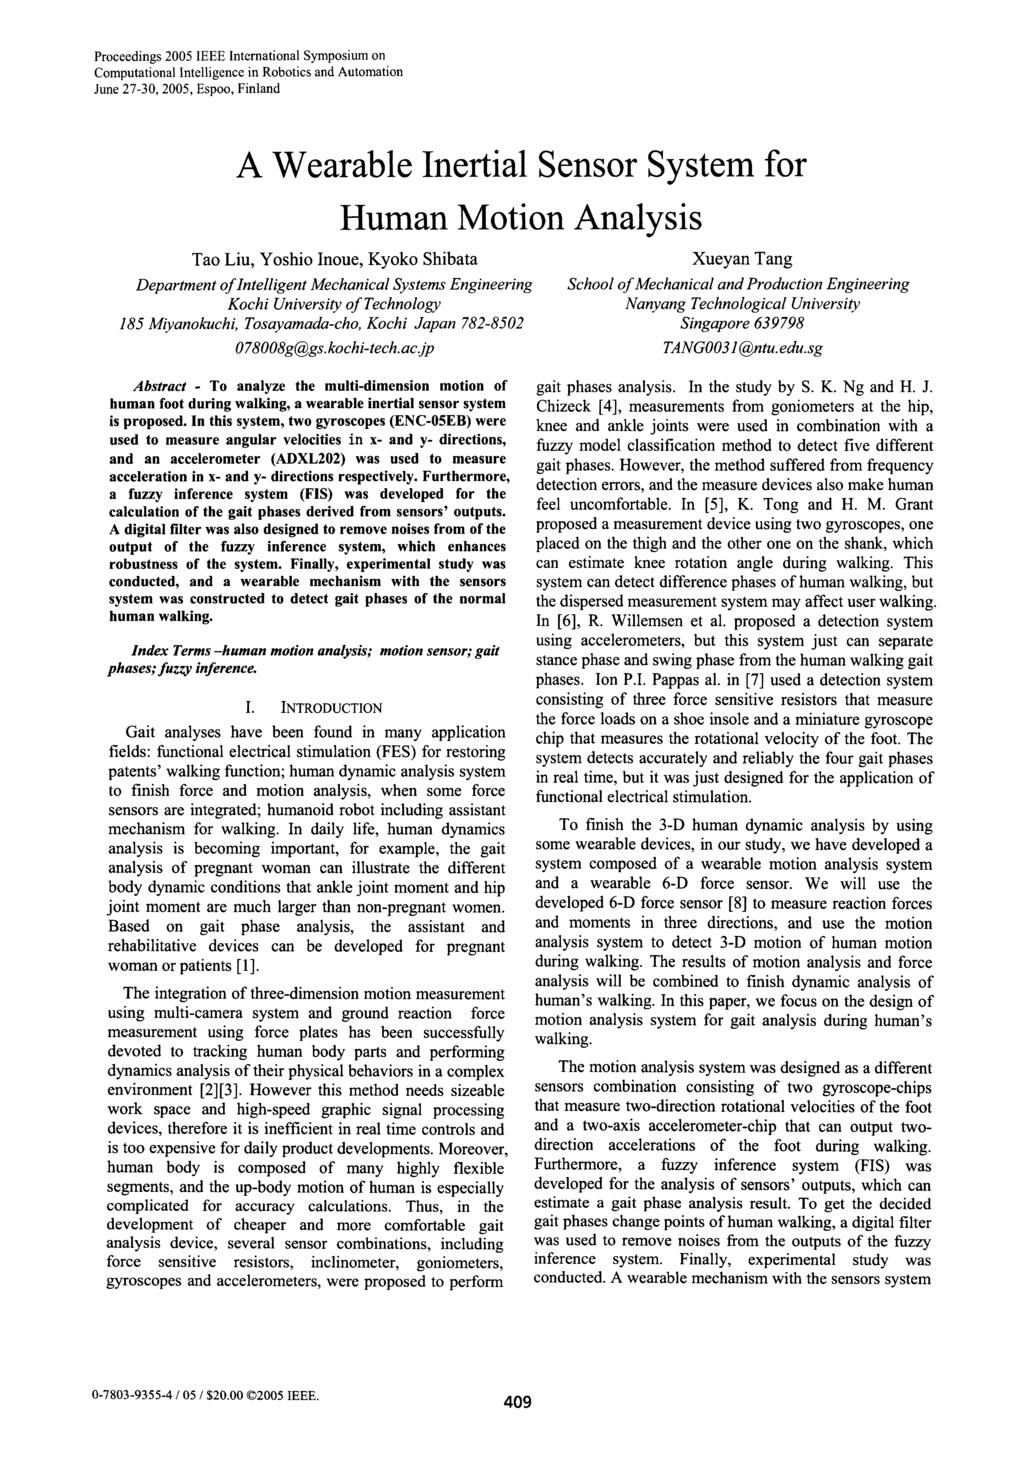 Proceedings 2005 IEEE International Symposium on Computational Intelligence in Robotics and Automation June 27-30, 2005, Espoo, Finland A Wearable Inertial Sensor System for Human Motion Analysis Tao